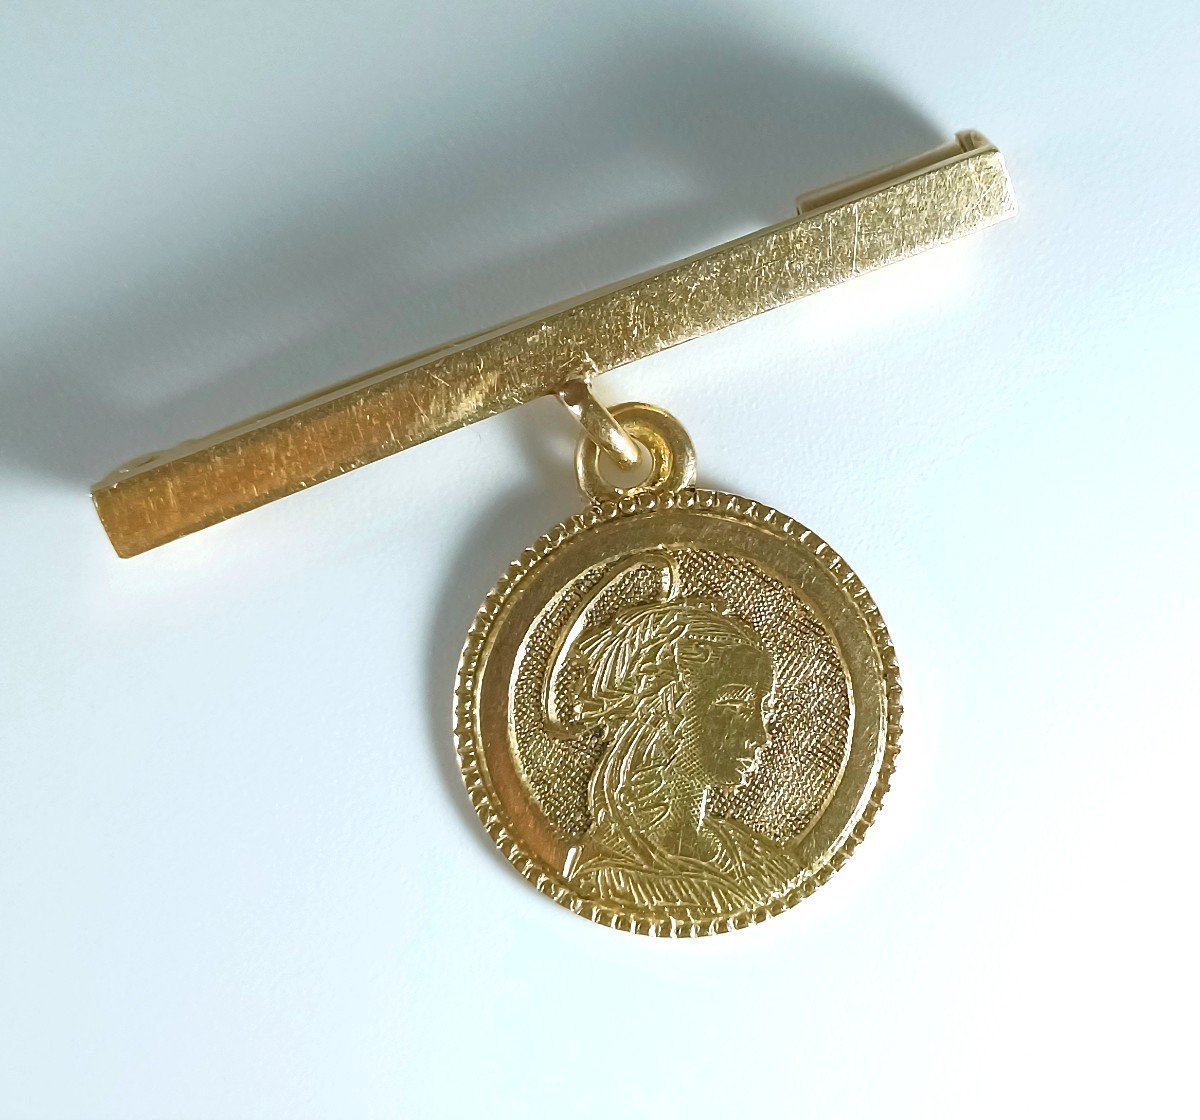 Small Guilloche Gold Brooch And Medal